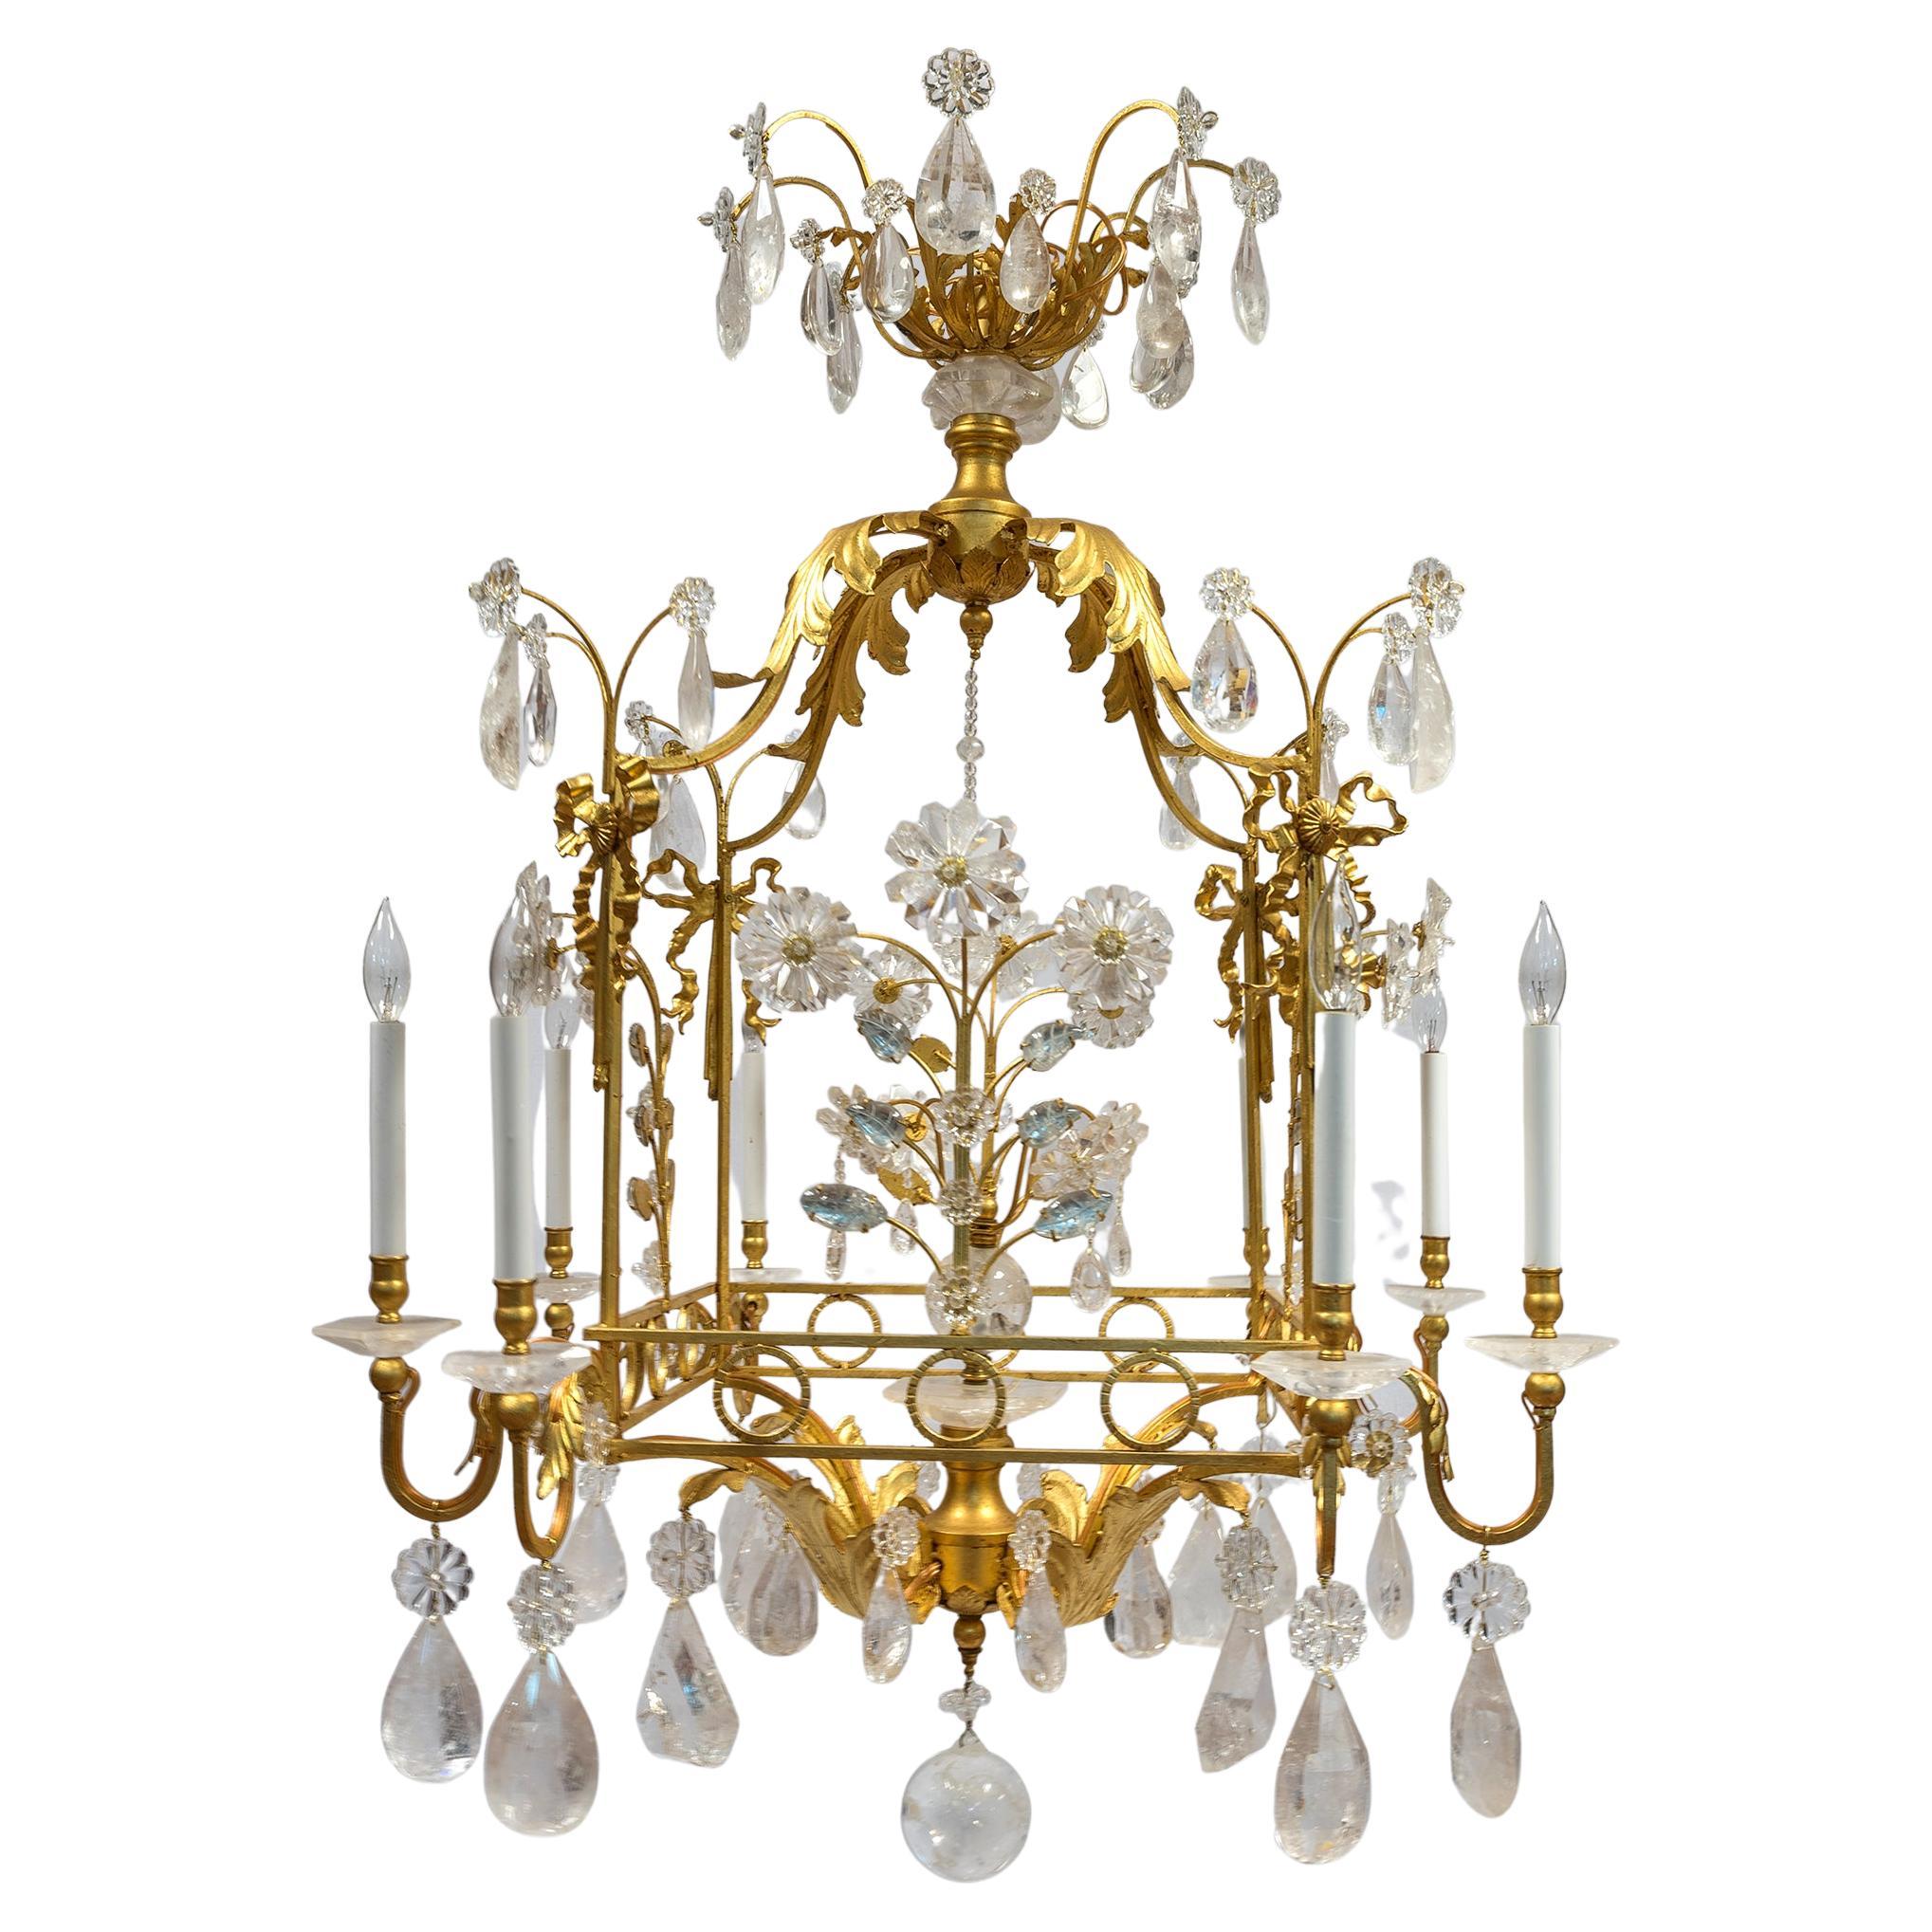 20th Century Opulent Rock Crystal Chandelier with foliage and ribbon motif For Sale